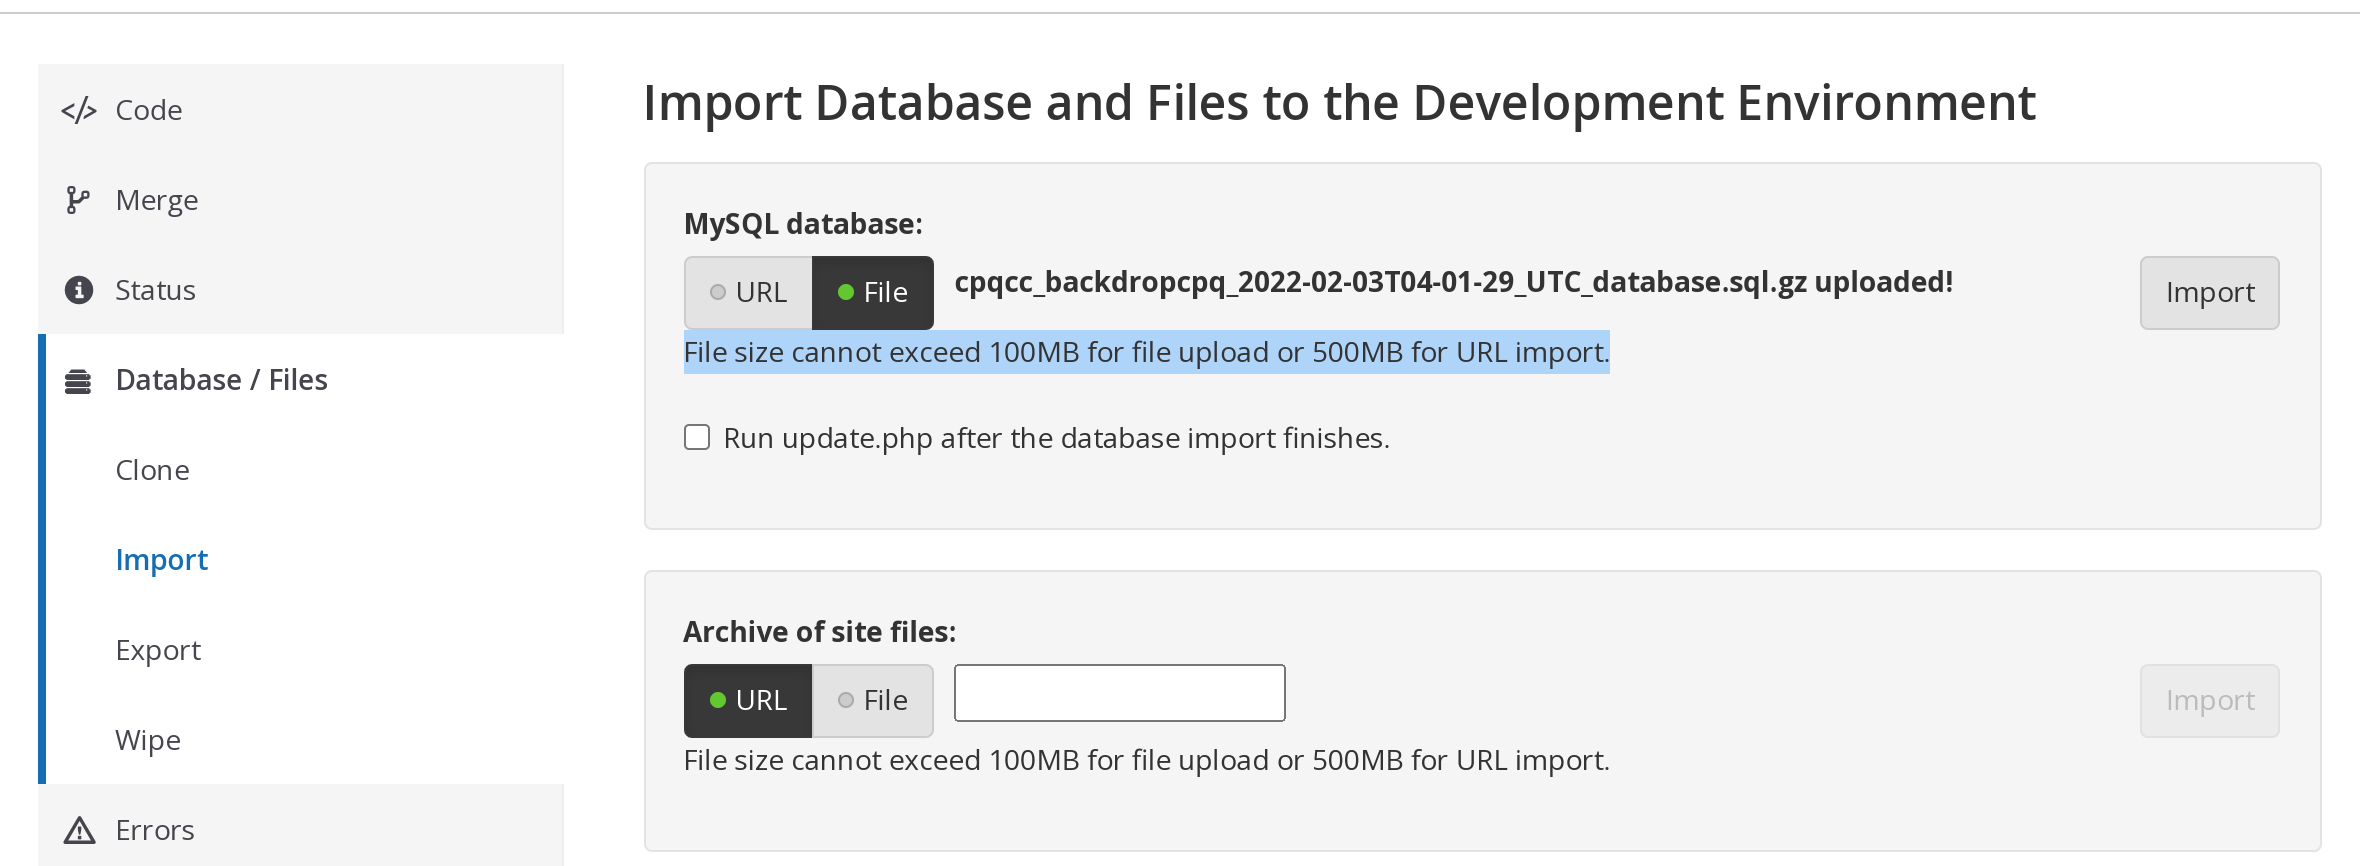 import files and db